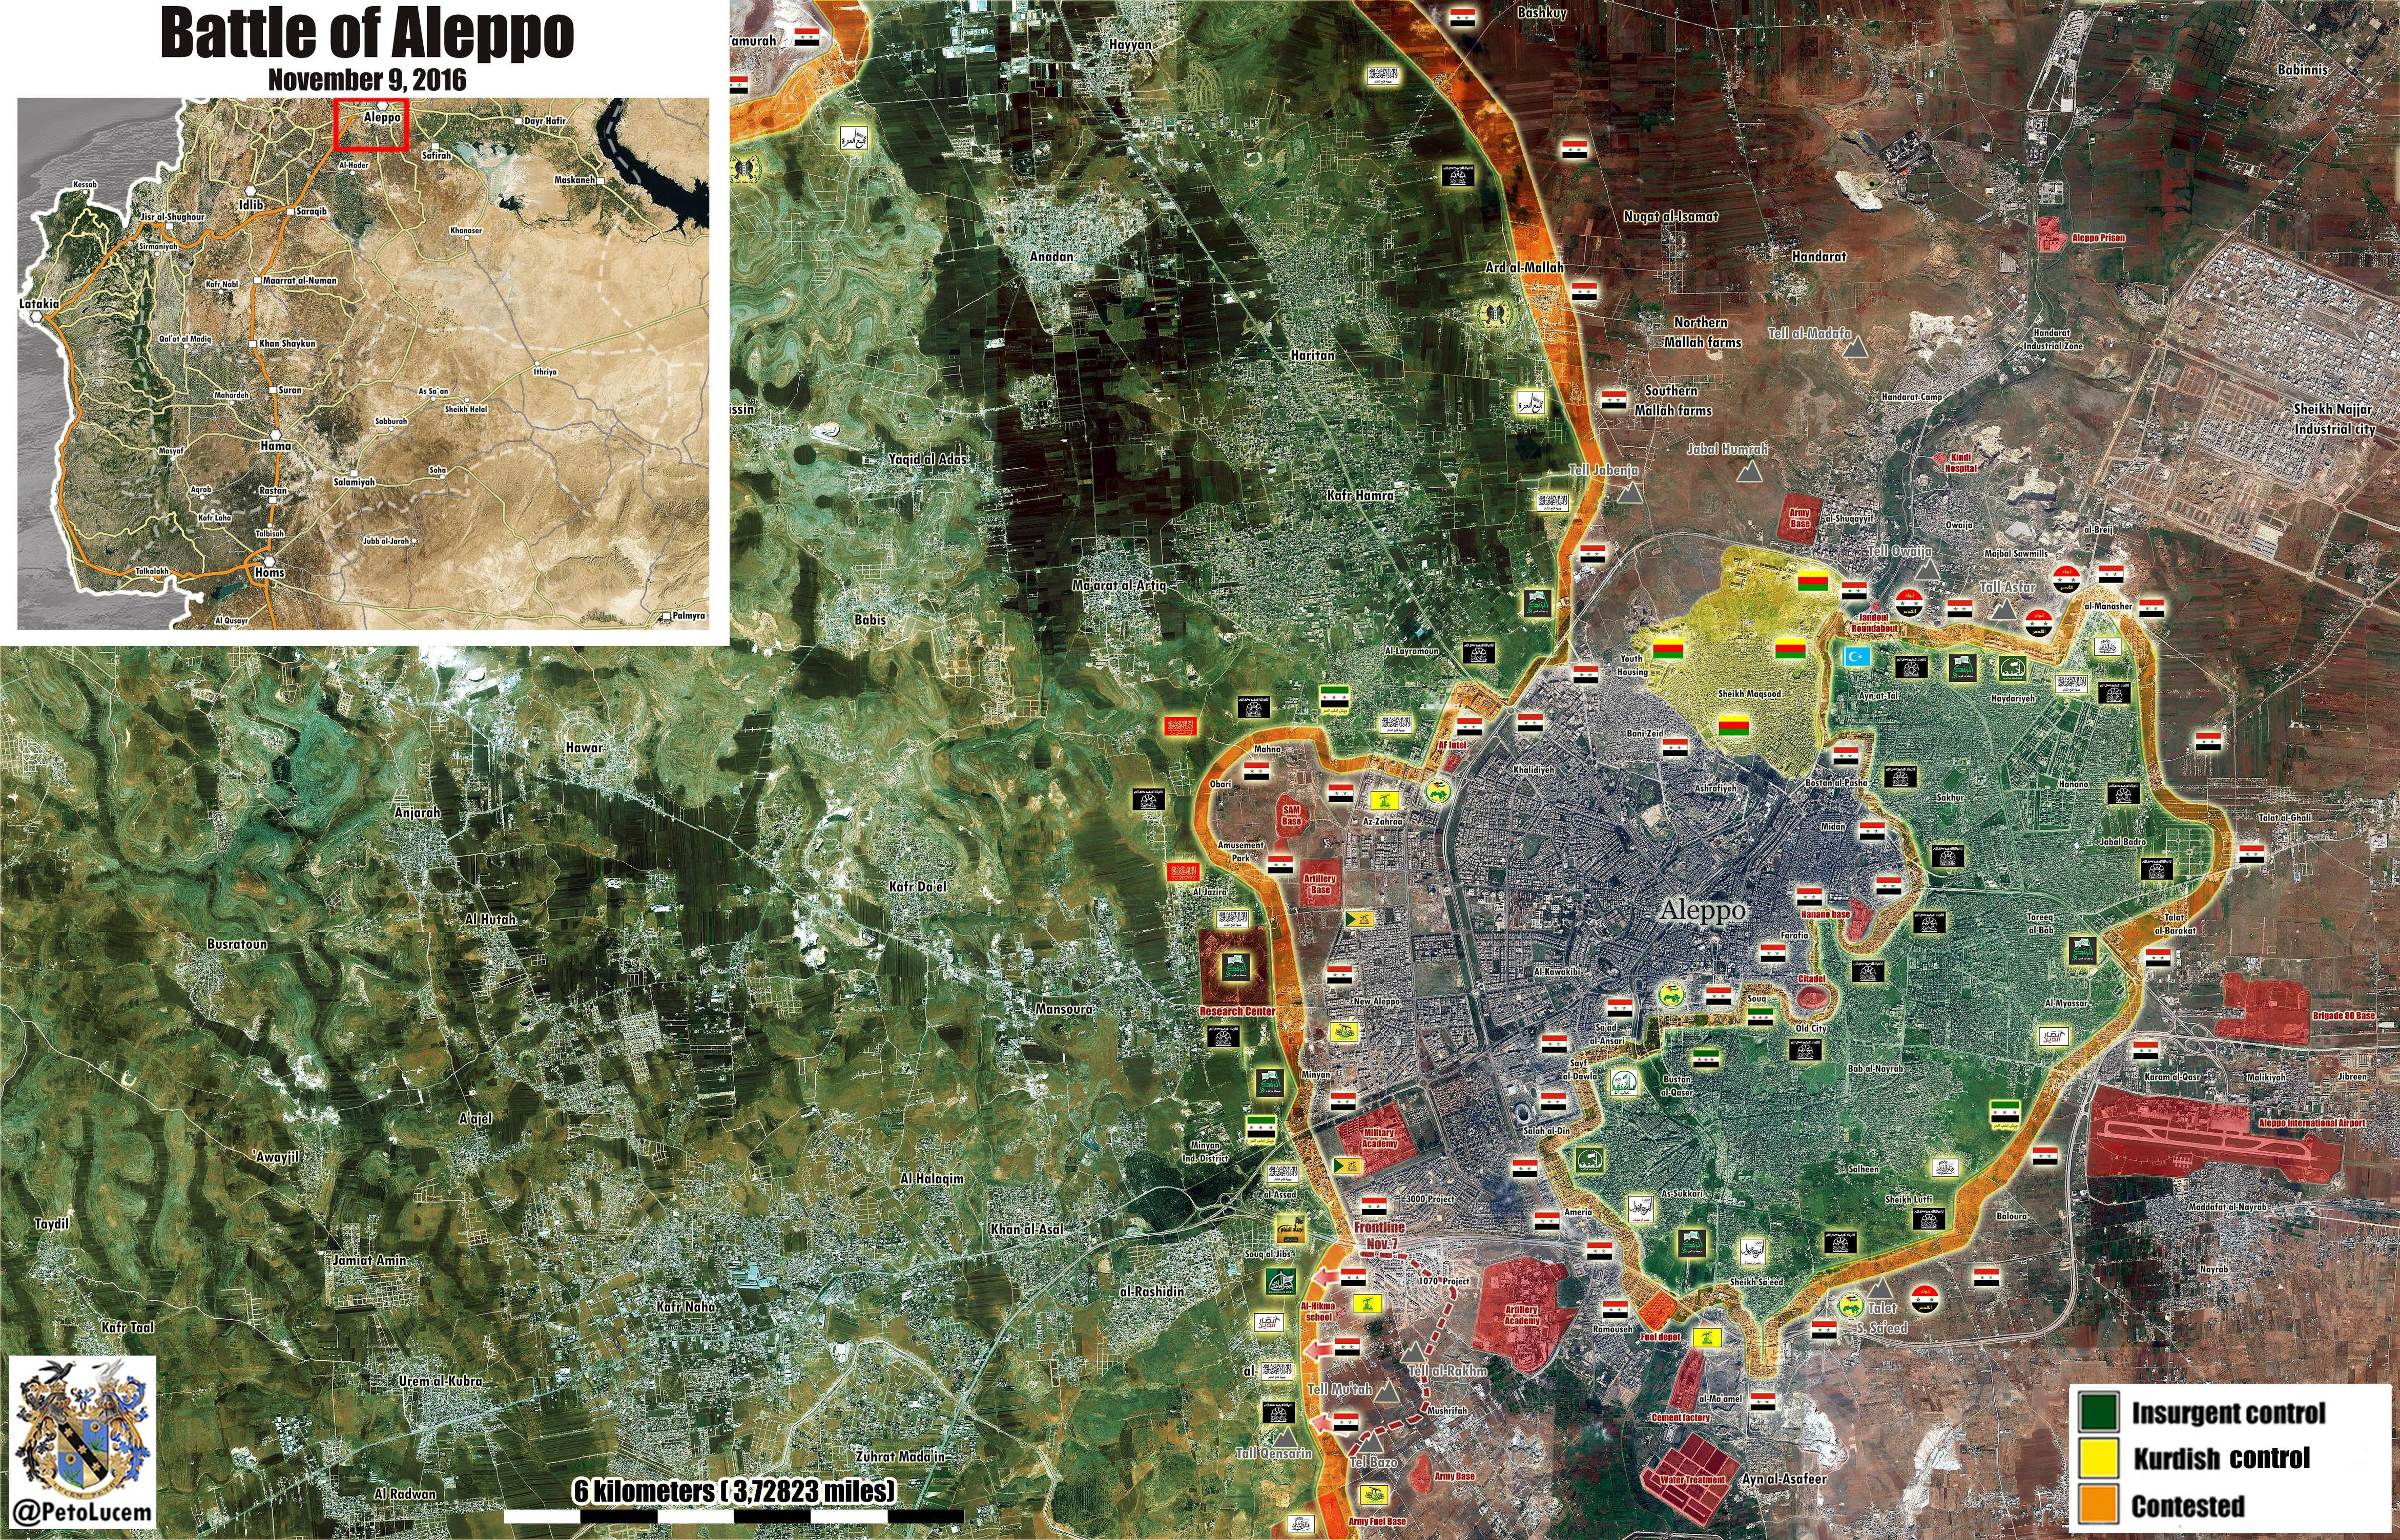 Syrian War Map Update: General Look at Military Situation in Aleppo City on November 9, 2016